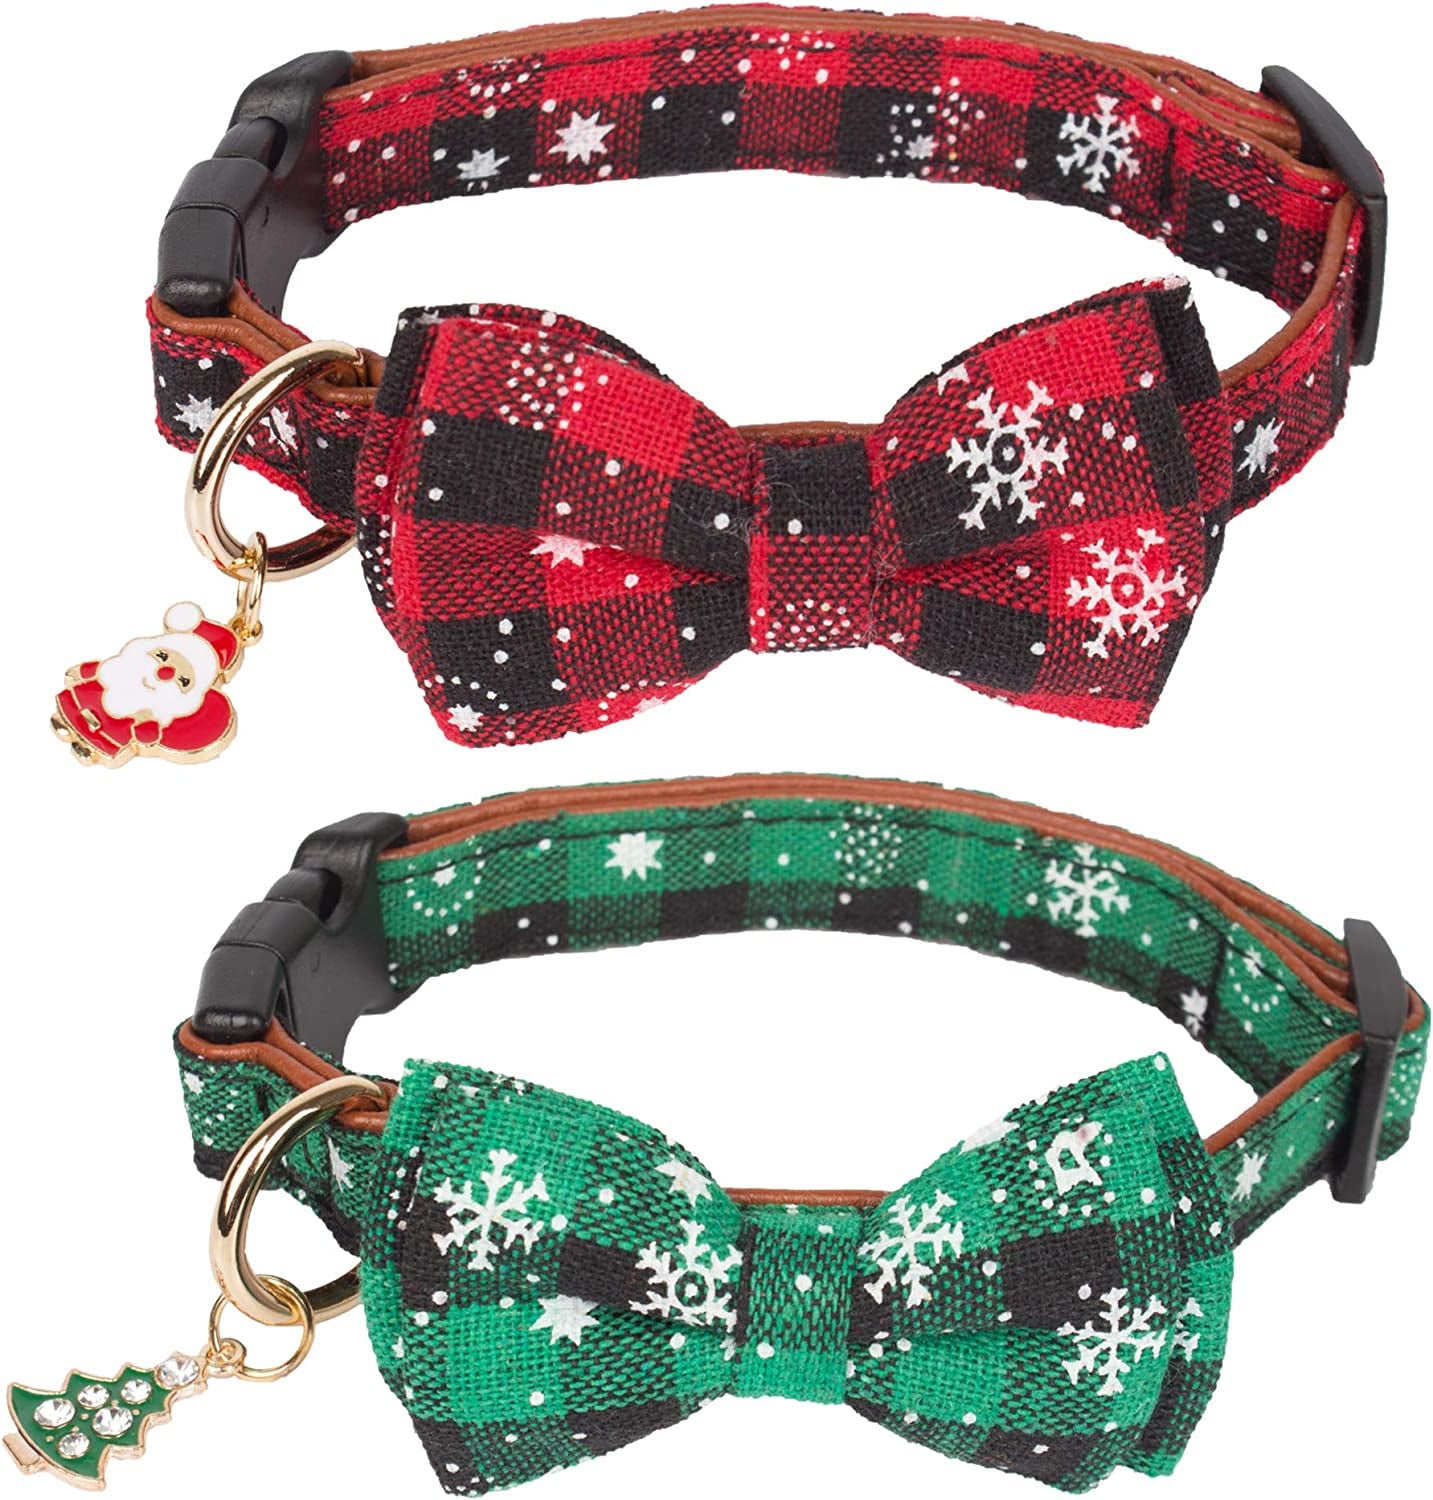 ADOGGYGO Christmas Dog Collar with Bow Tie Adjustable Bowtie Plaid Red Green Dog Pet Collars for Small Medium Large Dogs (Small, Red&Green&White) Animals & Pet Supplies > Pet Supplies > Dog Supplies > Dog Apparel ADOGGYGO Red&Green&White Small 